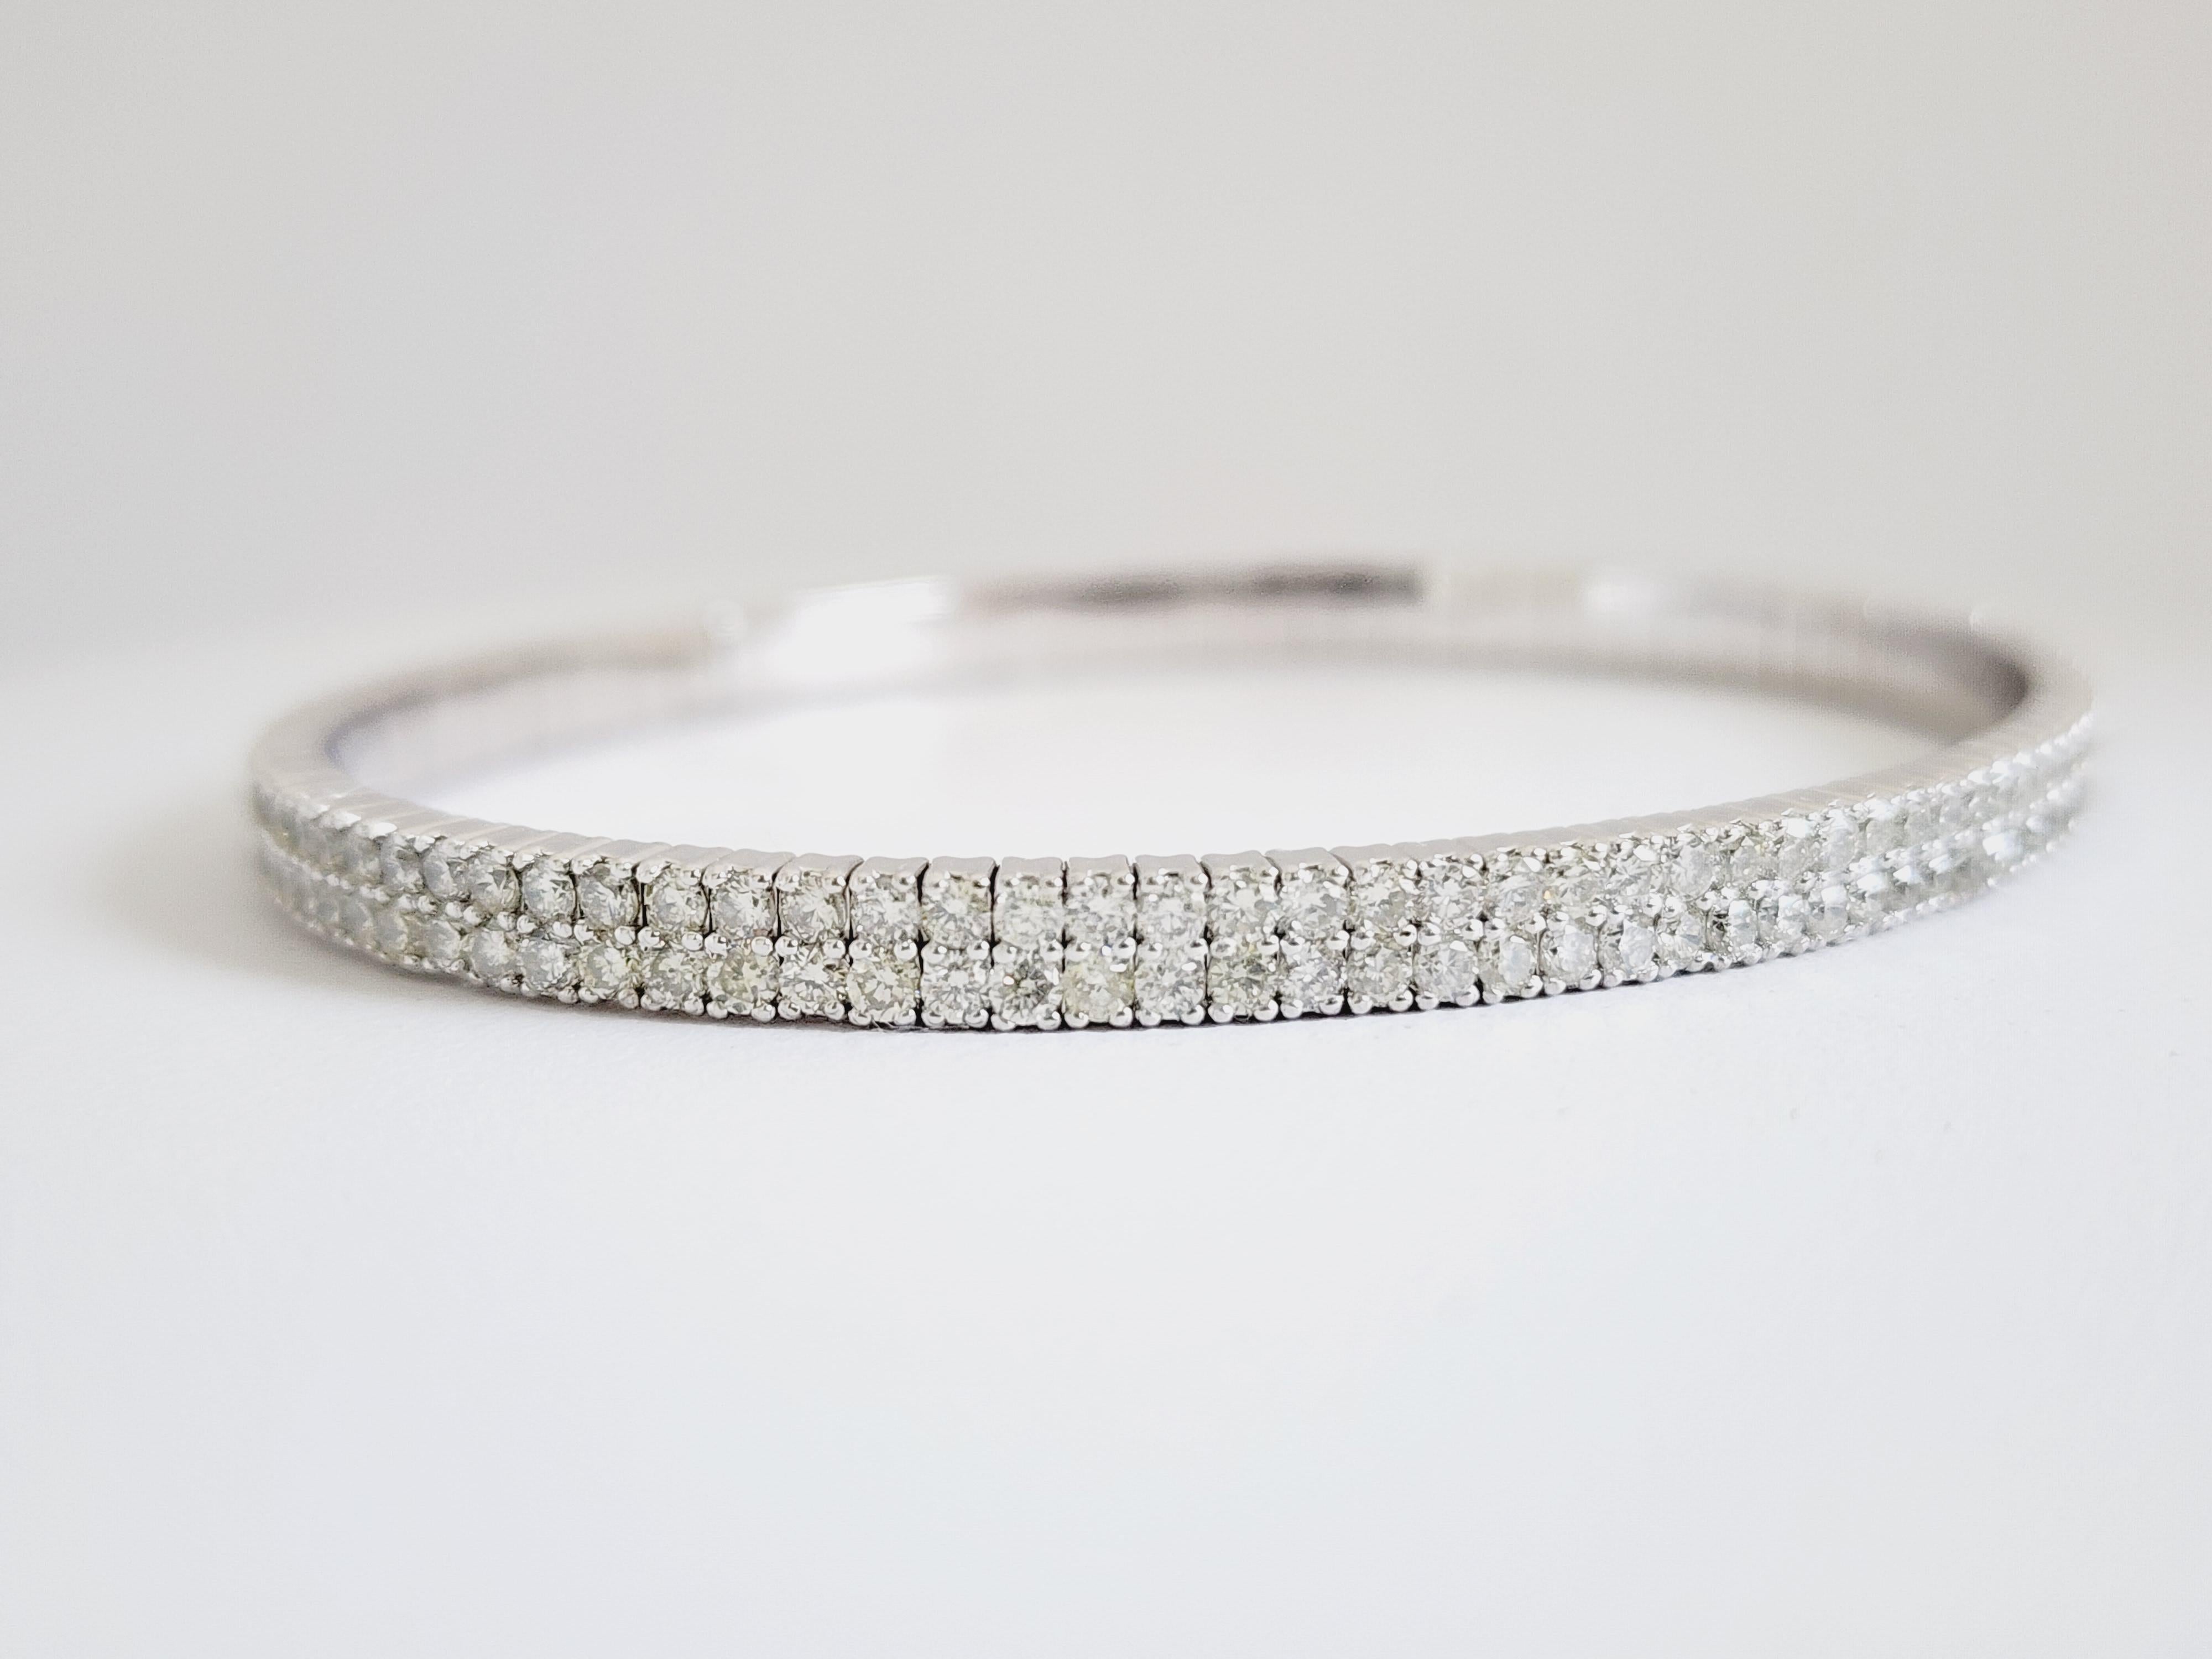 Natural Diamonds 4.85 ctw Flexible double row bangle white gold 14k 7 Inch. Color I, Clarity SI. 4 mm.